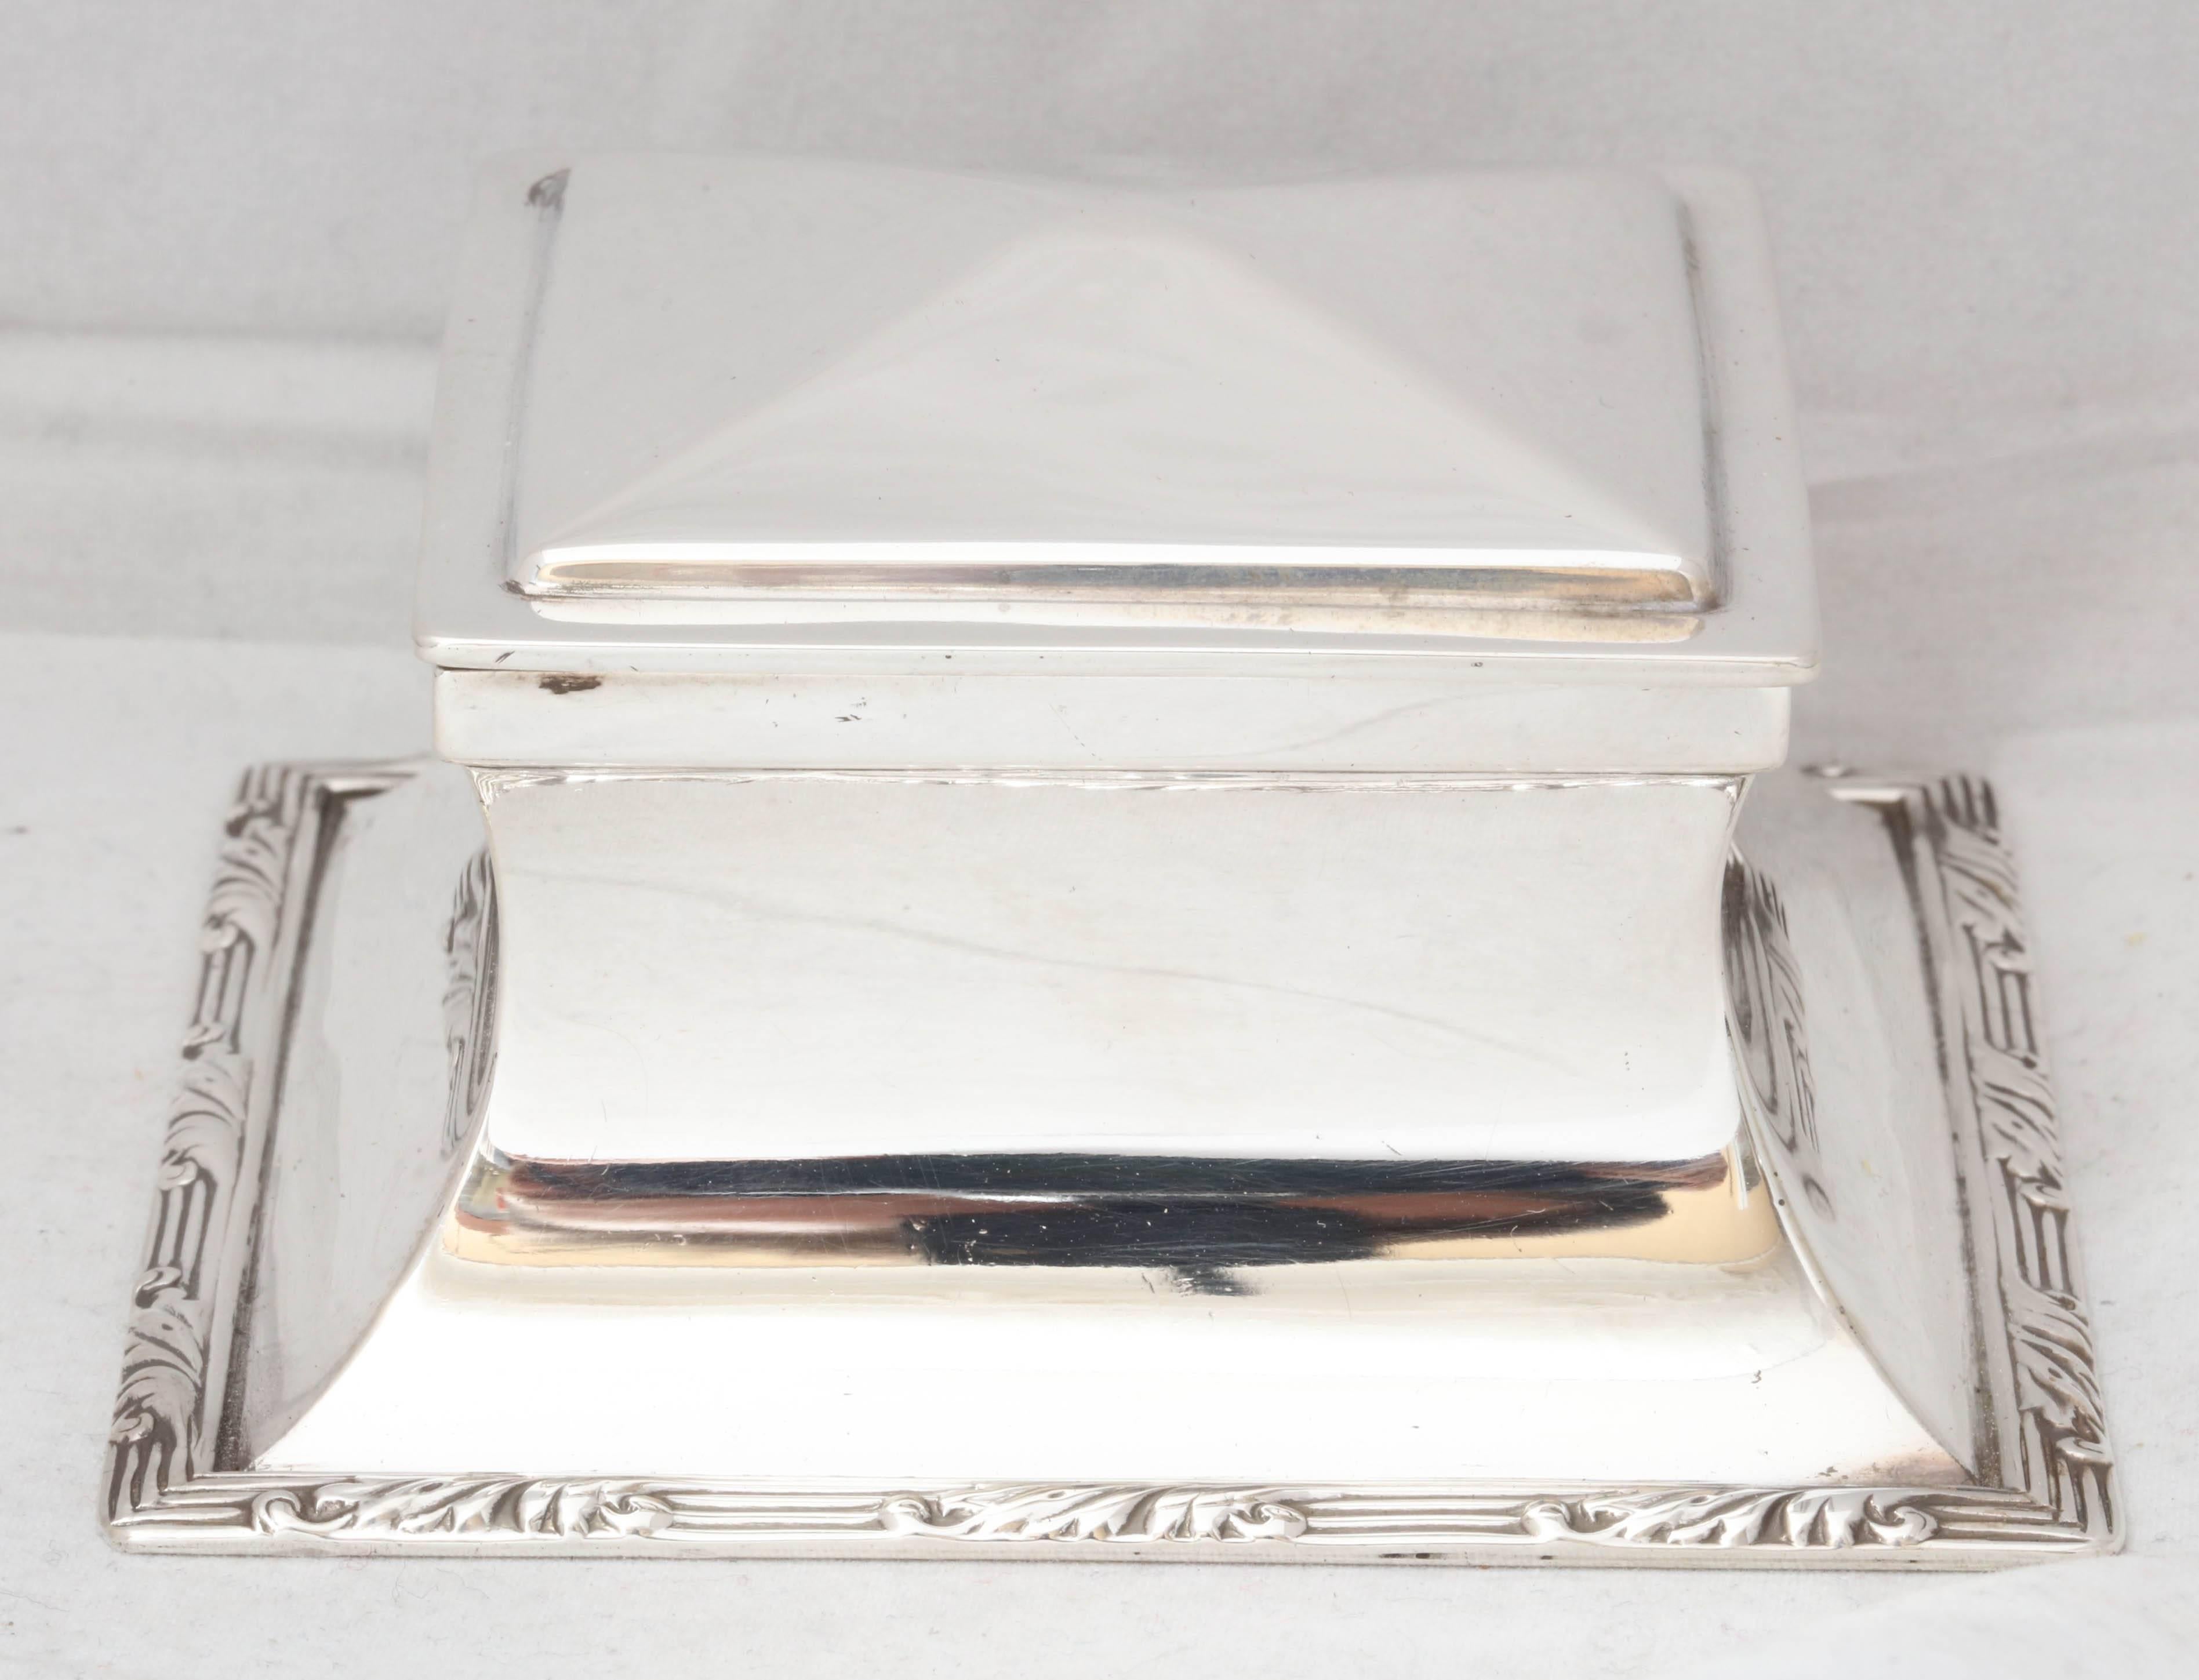 Edwardian, sterling silver inkwell with hinged lid, Birmingham, England, 1908, Heath & Middleton - makers. Retailed at Mappin & Webb. Has sterling silver liner. Measures: 4